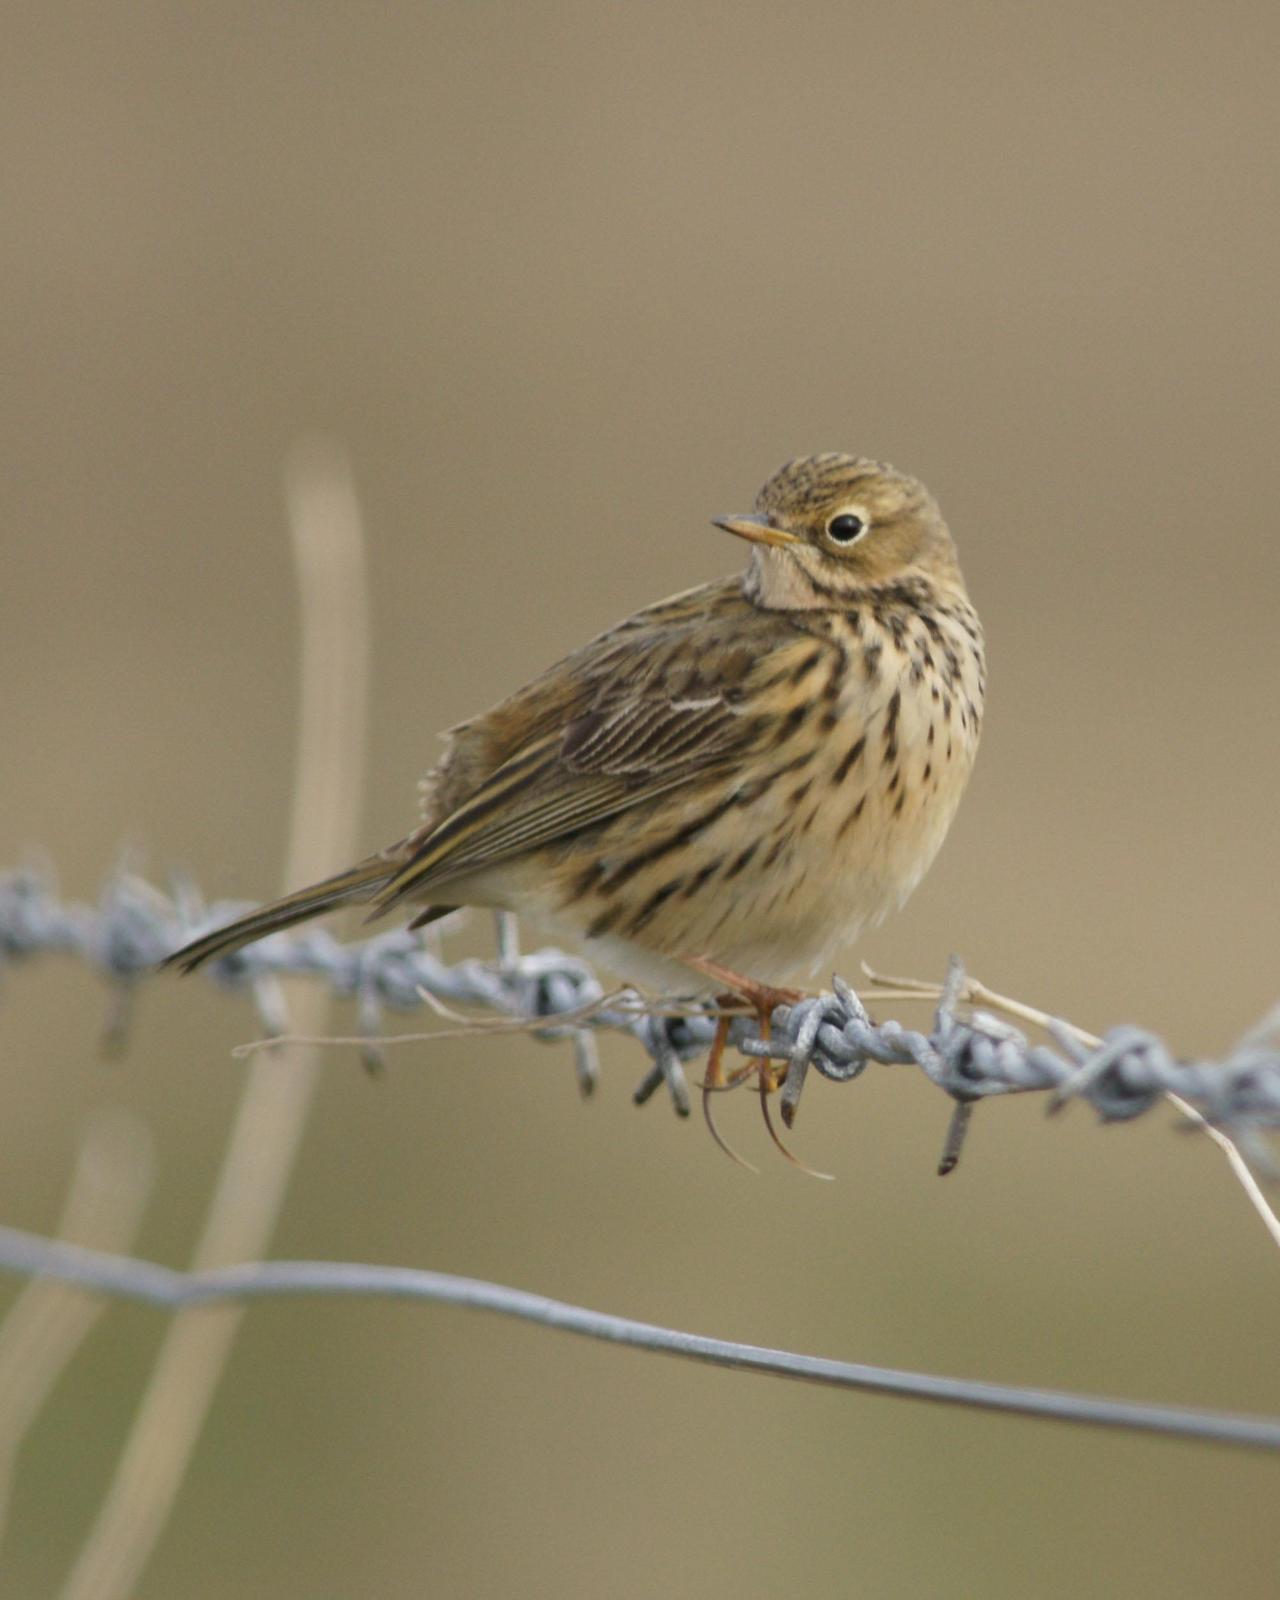 Meadow Pipit Photo by Steve Percival